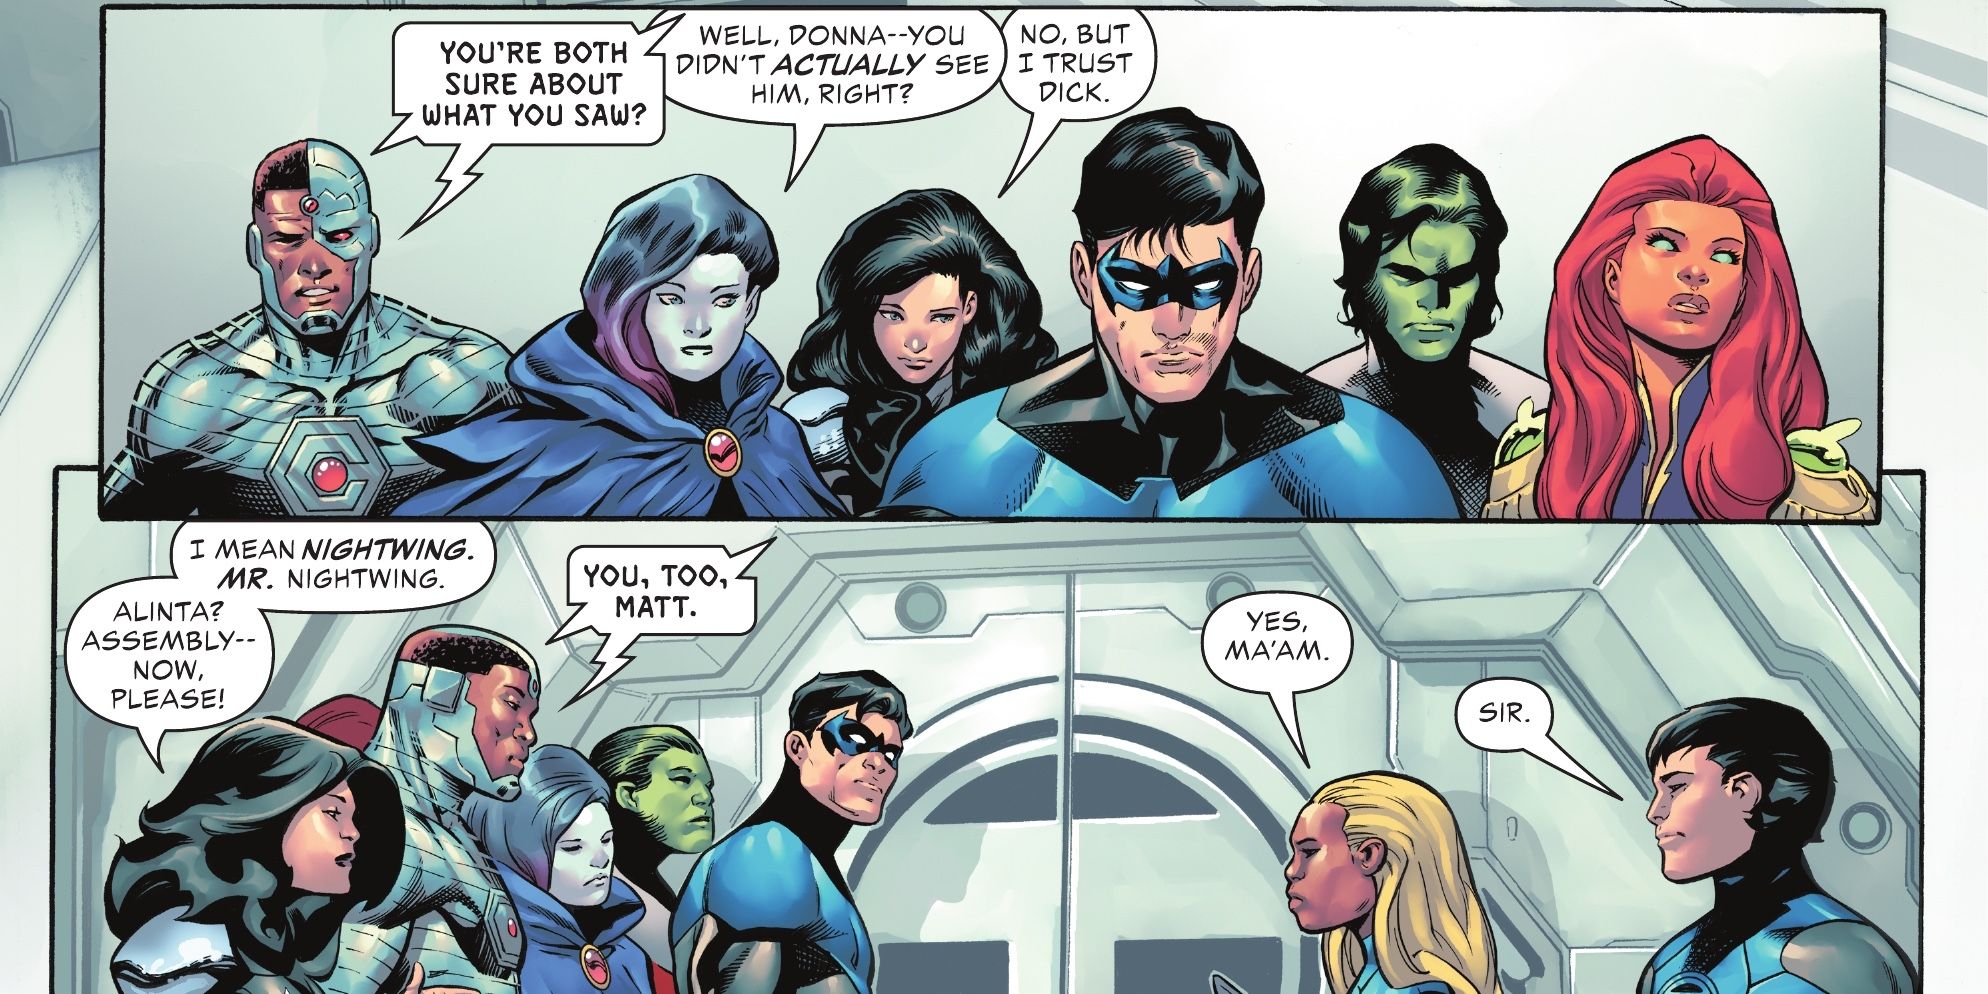 Nightwing being called by his real name in DC comics